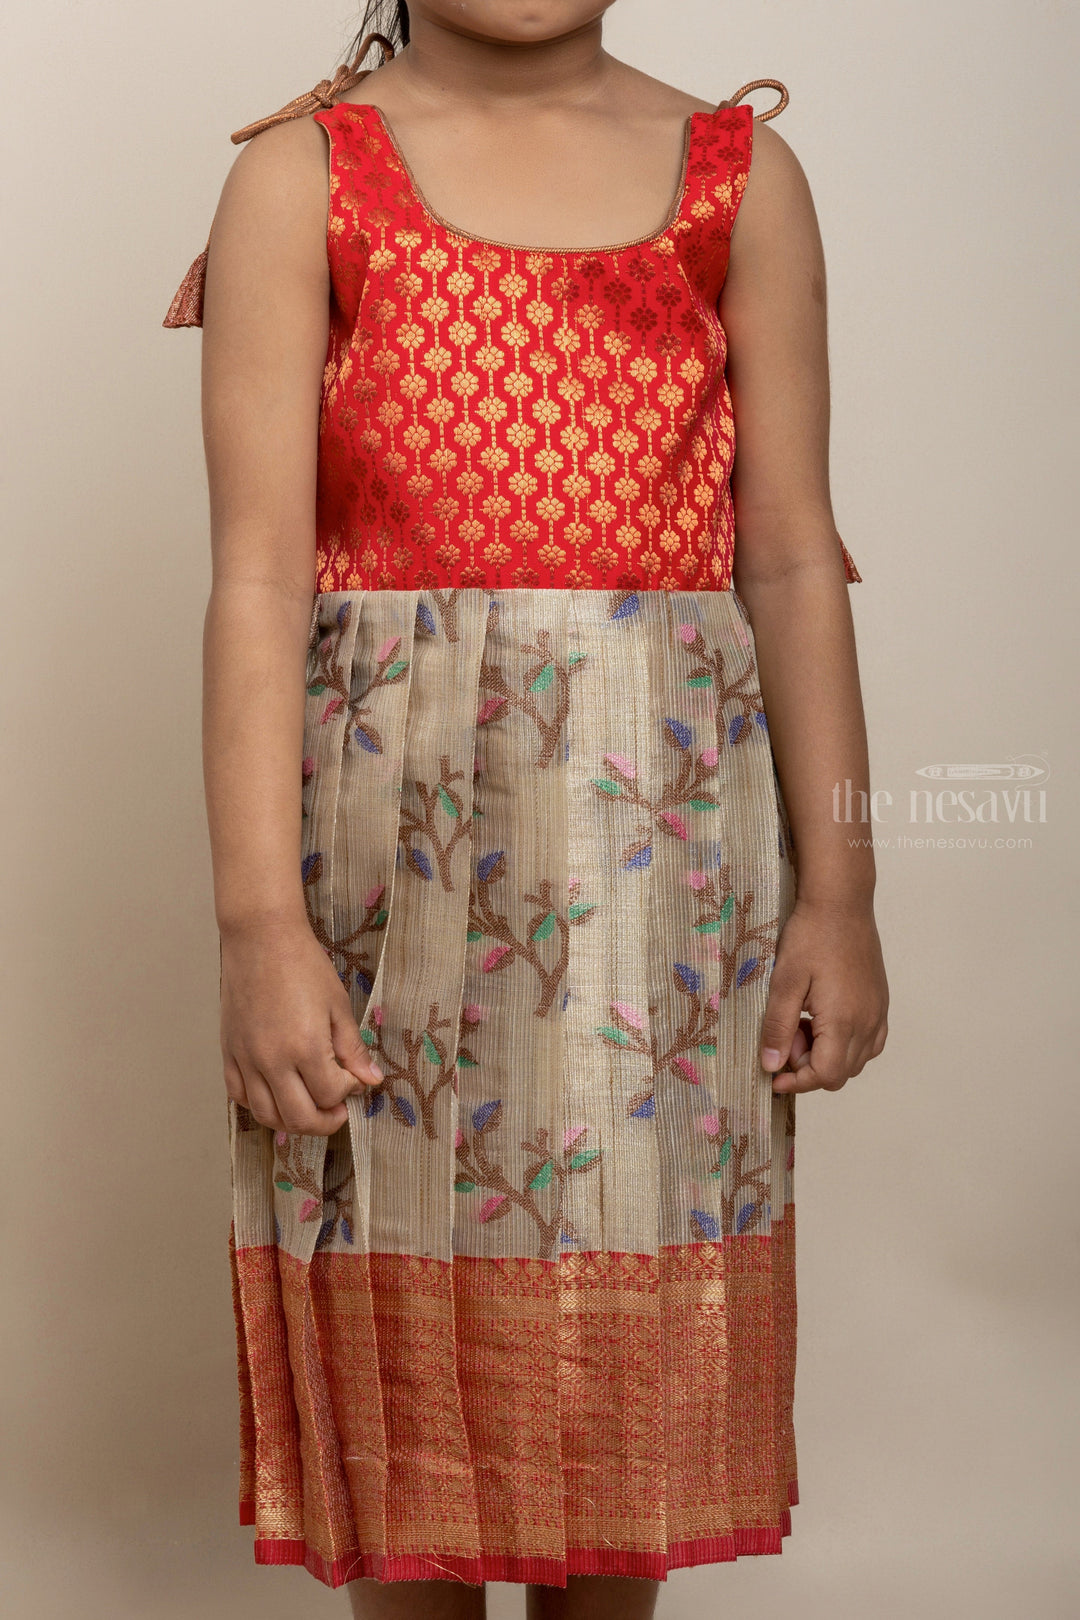 The Nesavu Tie-up Frock Racy Bright Red With Floral Printed Brocade Designer Tie-Up Frocks For Girls psr silks Nesavu